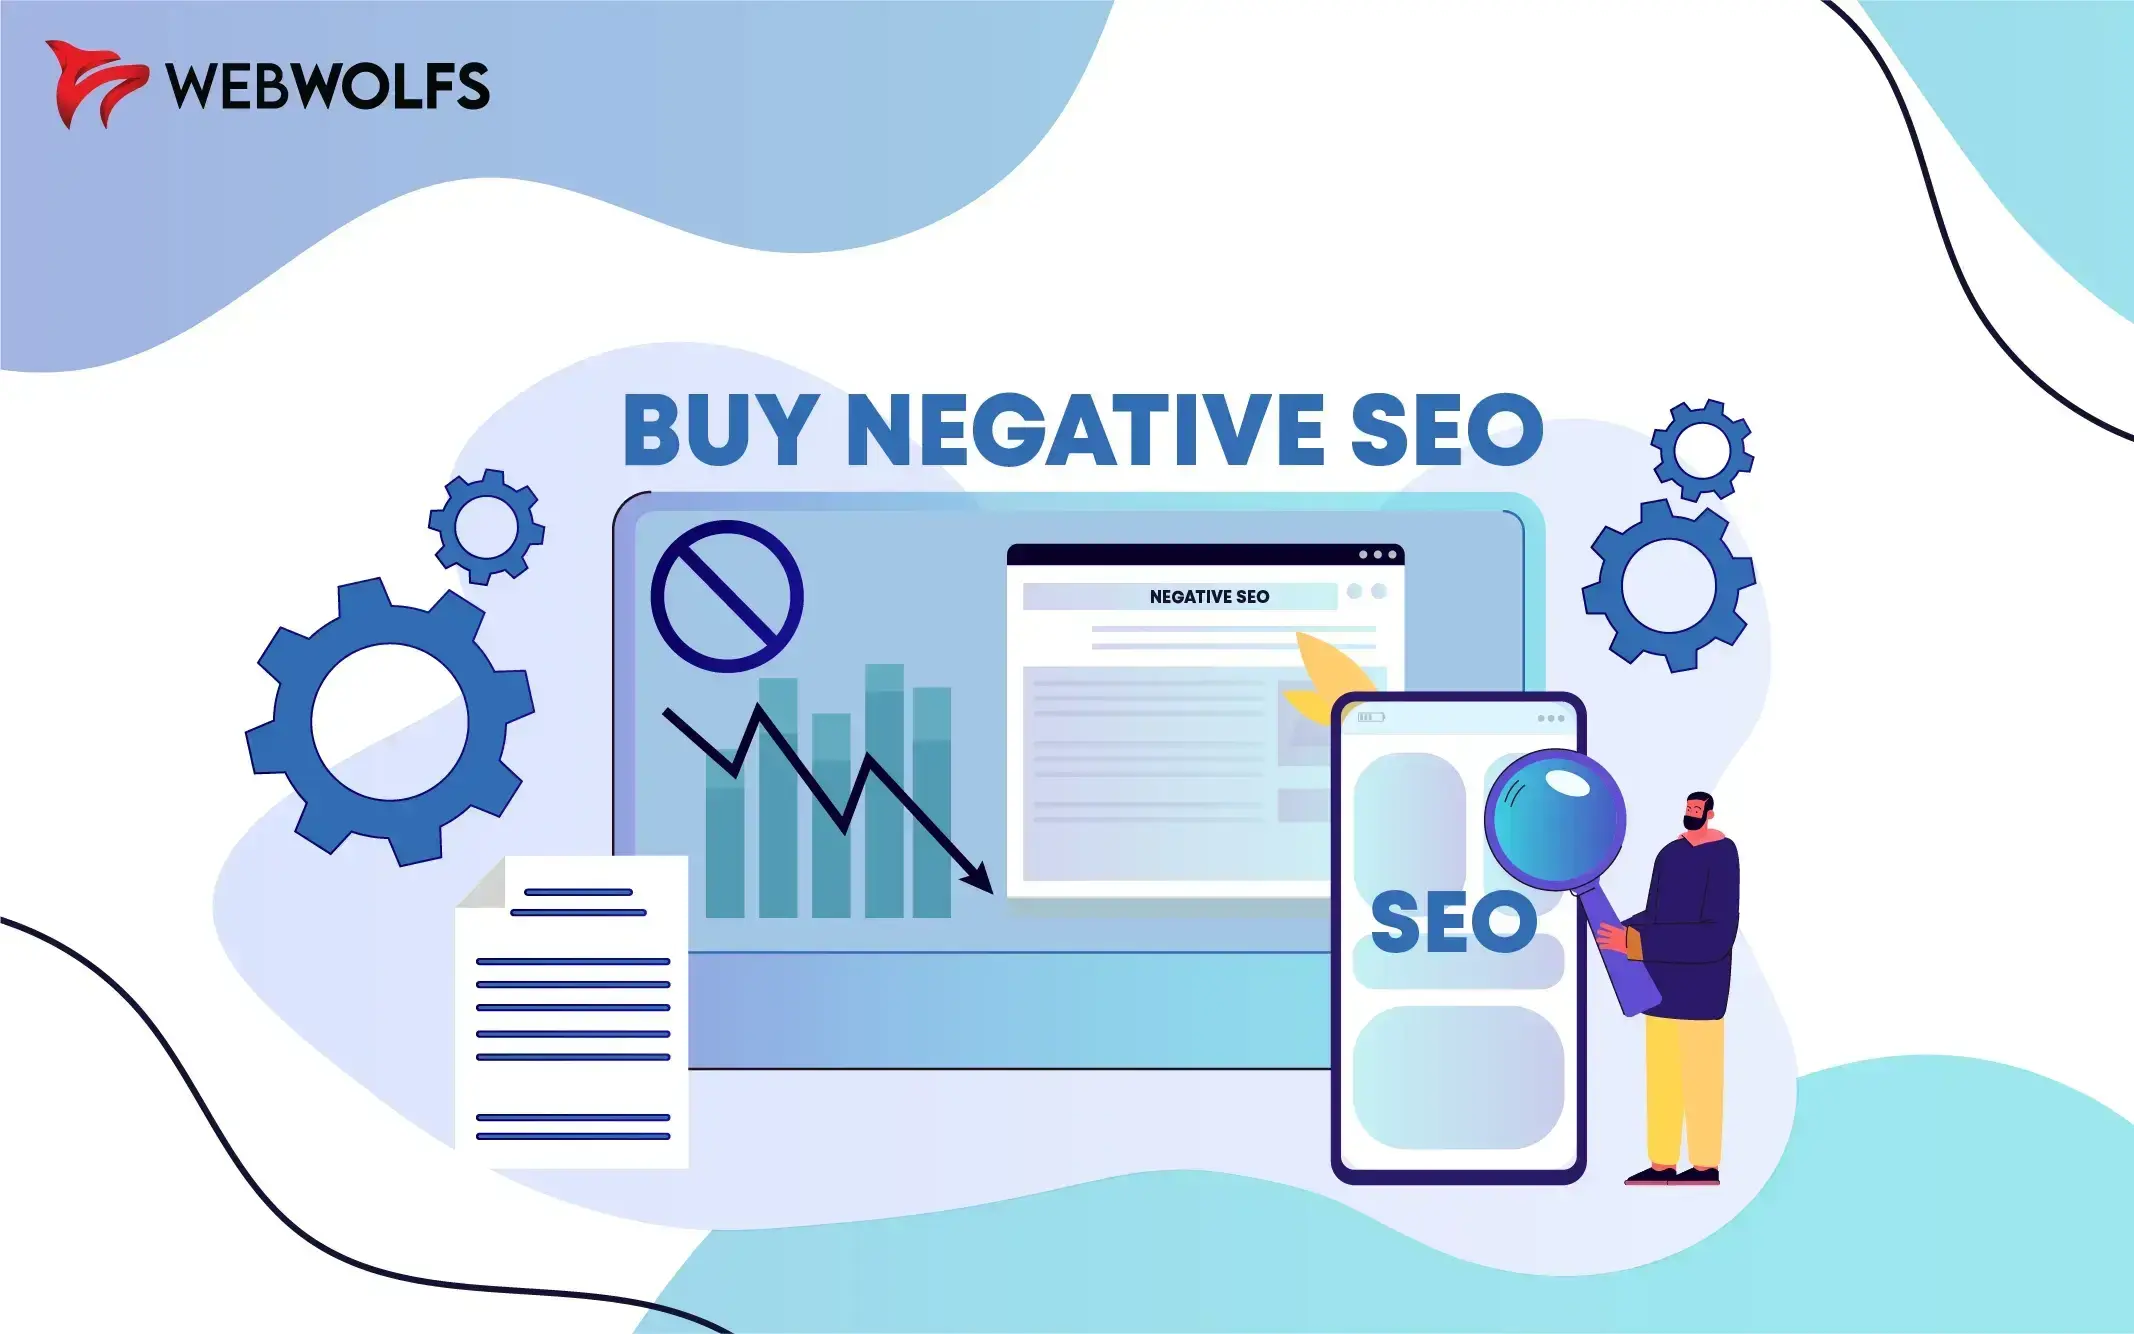 Why Should Businesses Buy Negative SEO?